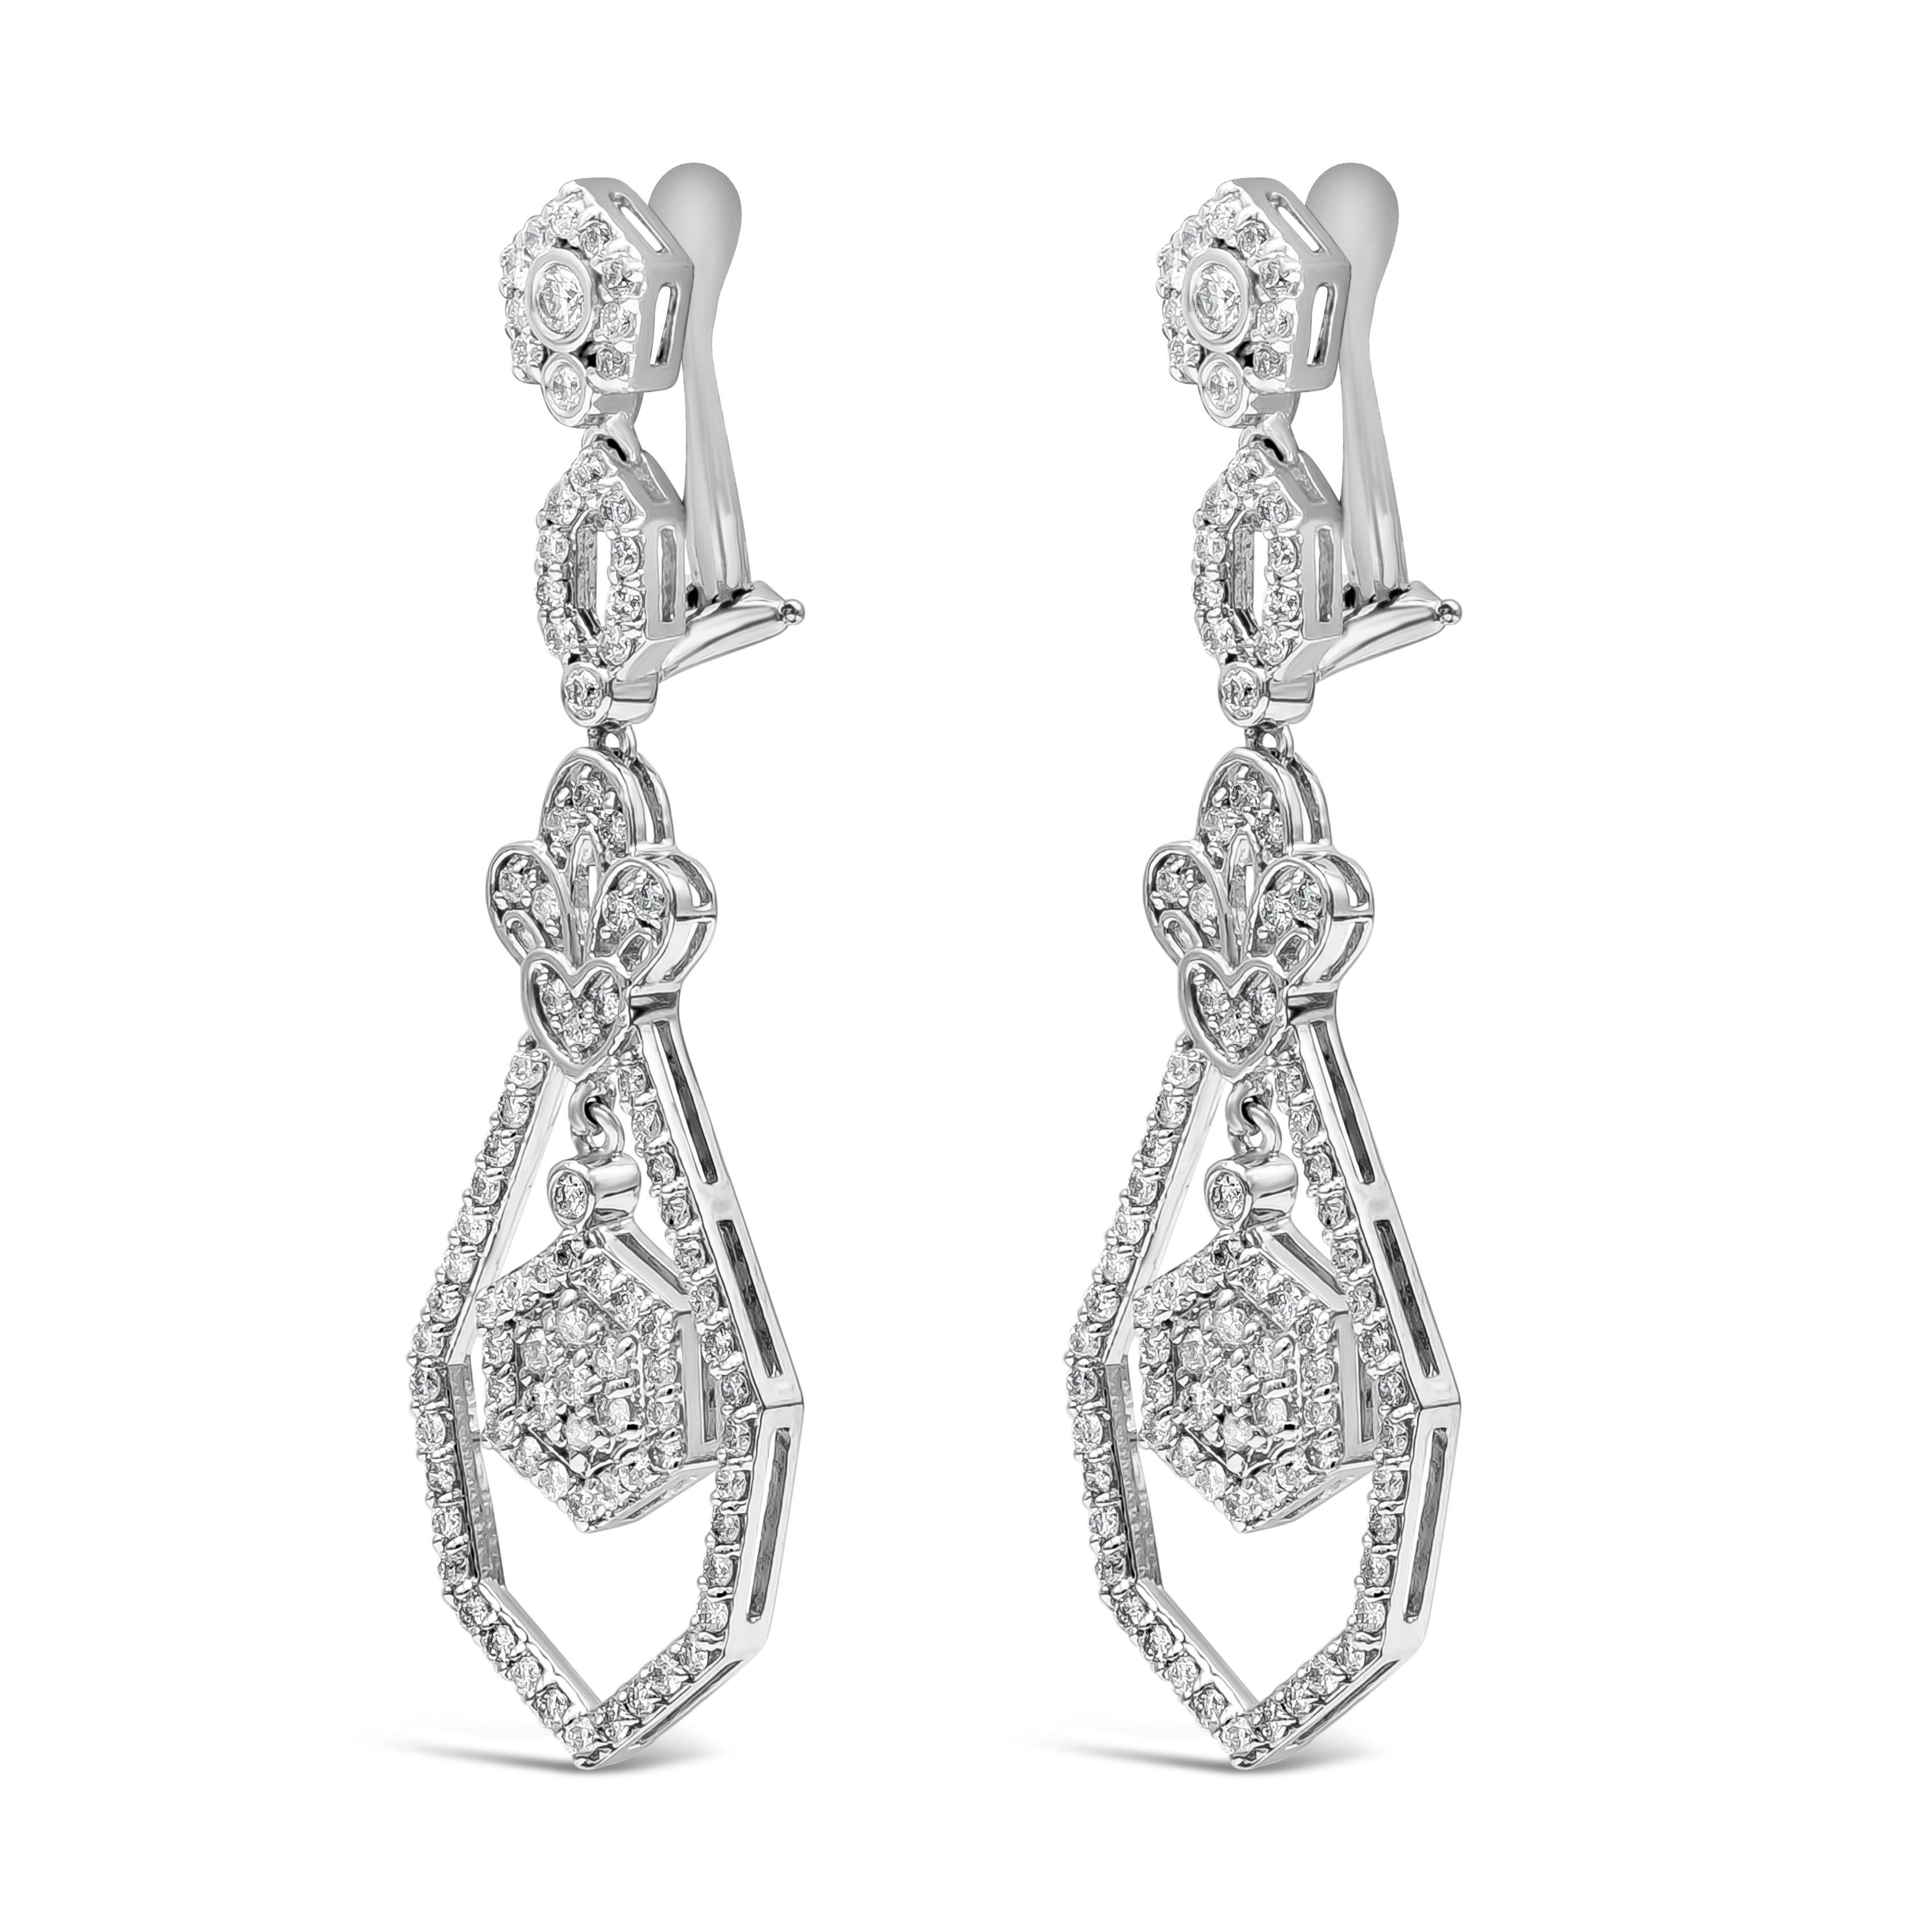 An exquisite chandelier dangle earrings showcasing 184 round diamonds weighing 1.50 carats total, H Color and I1 in Clarity. In a drop open-work design with an antique look. Made with 14K White Gold. 

Style available in different price ranges.